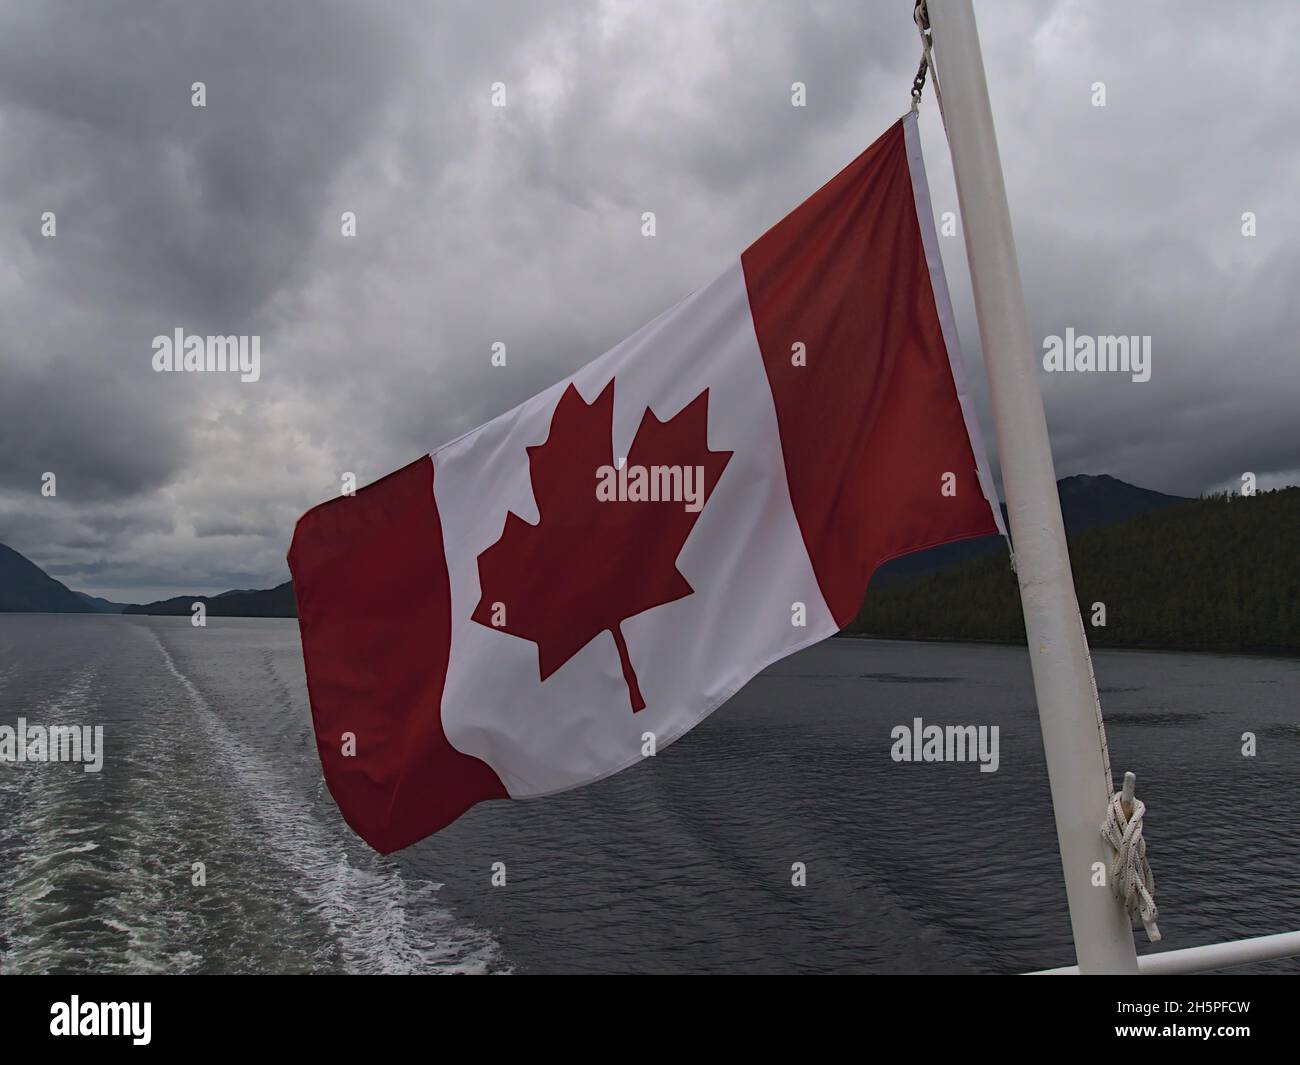 Red and white colored Canadian national flag with maple leaf flying in the wind at the stearn of a ferry boat crossing the Inside Passage, Canada. Stock Photo